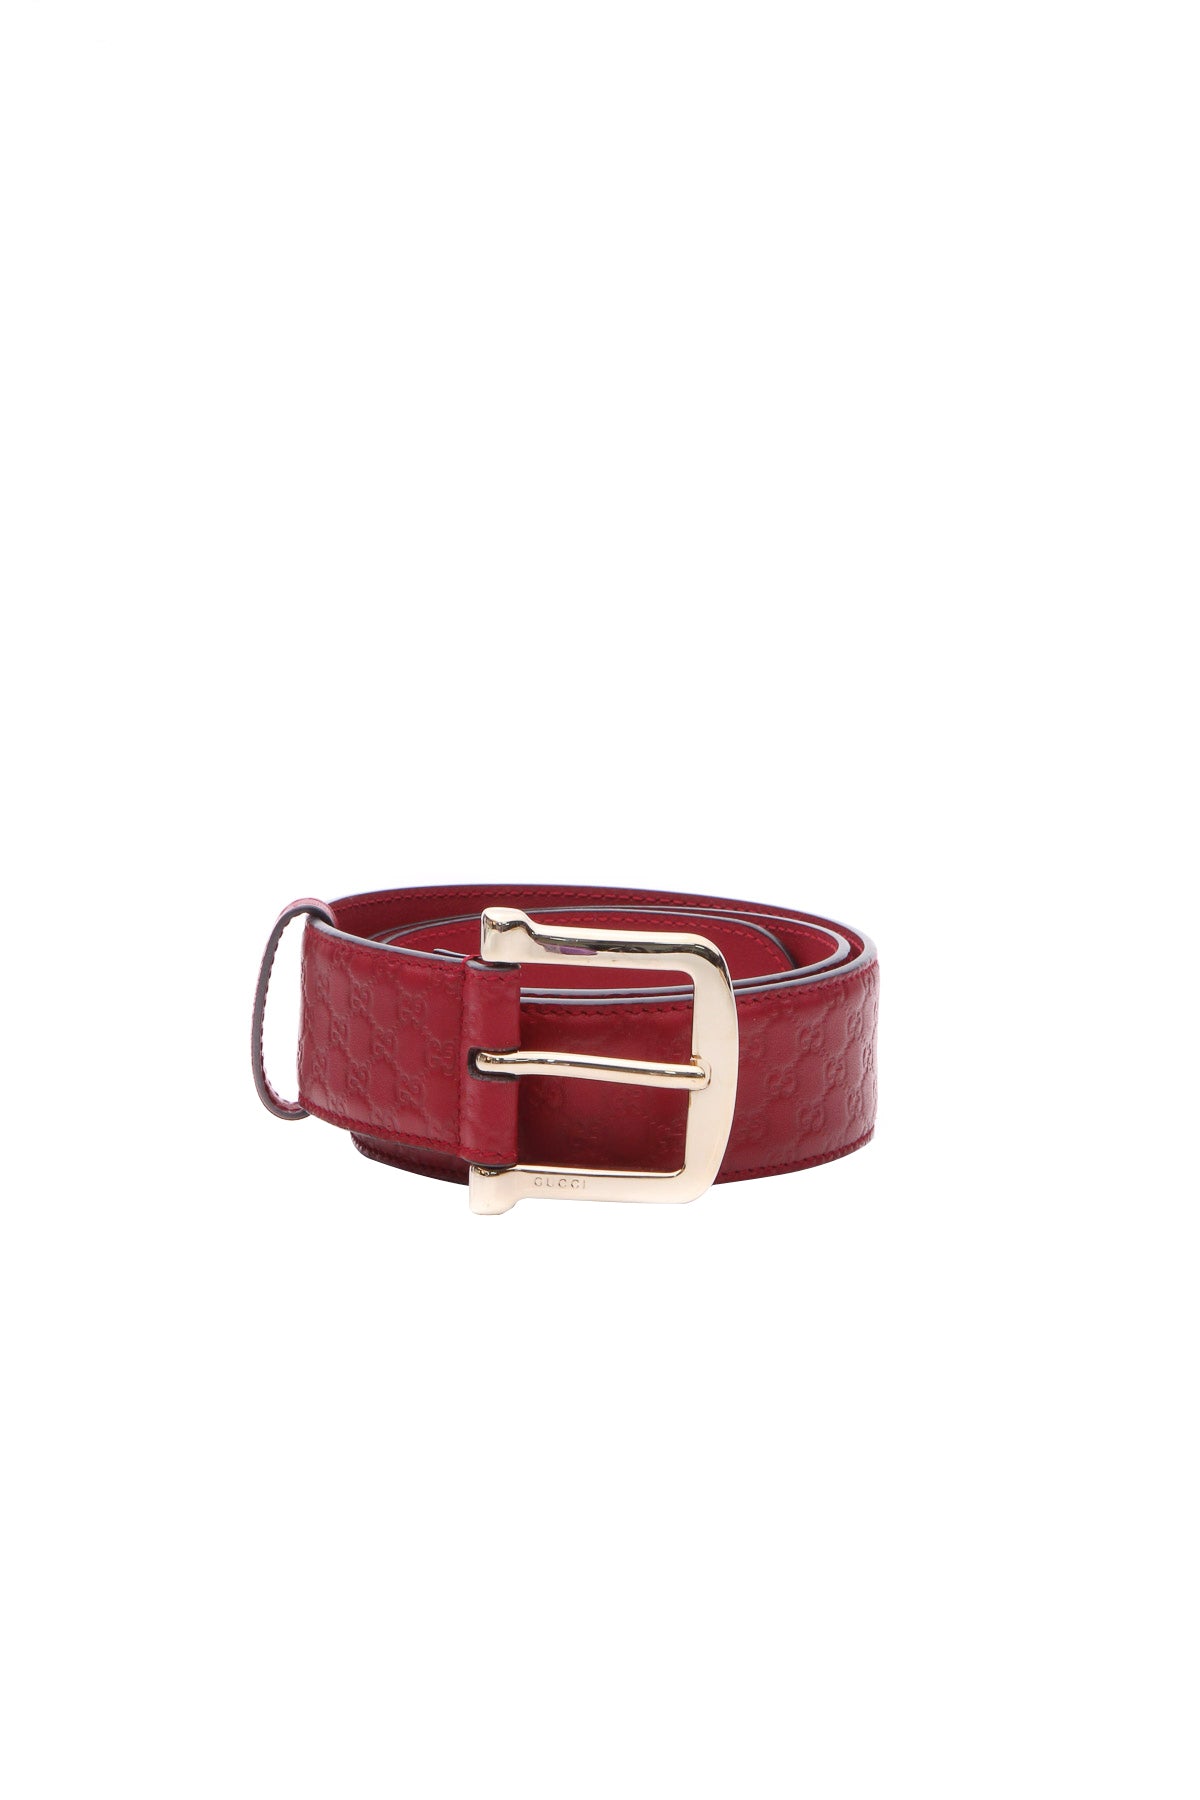 Gucci Microguccissima Leather Belt Brown Size 100/44